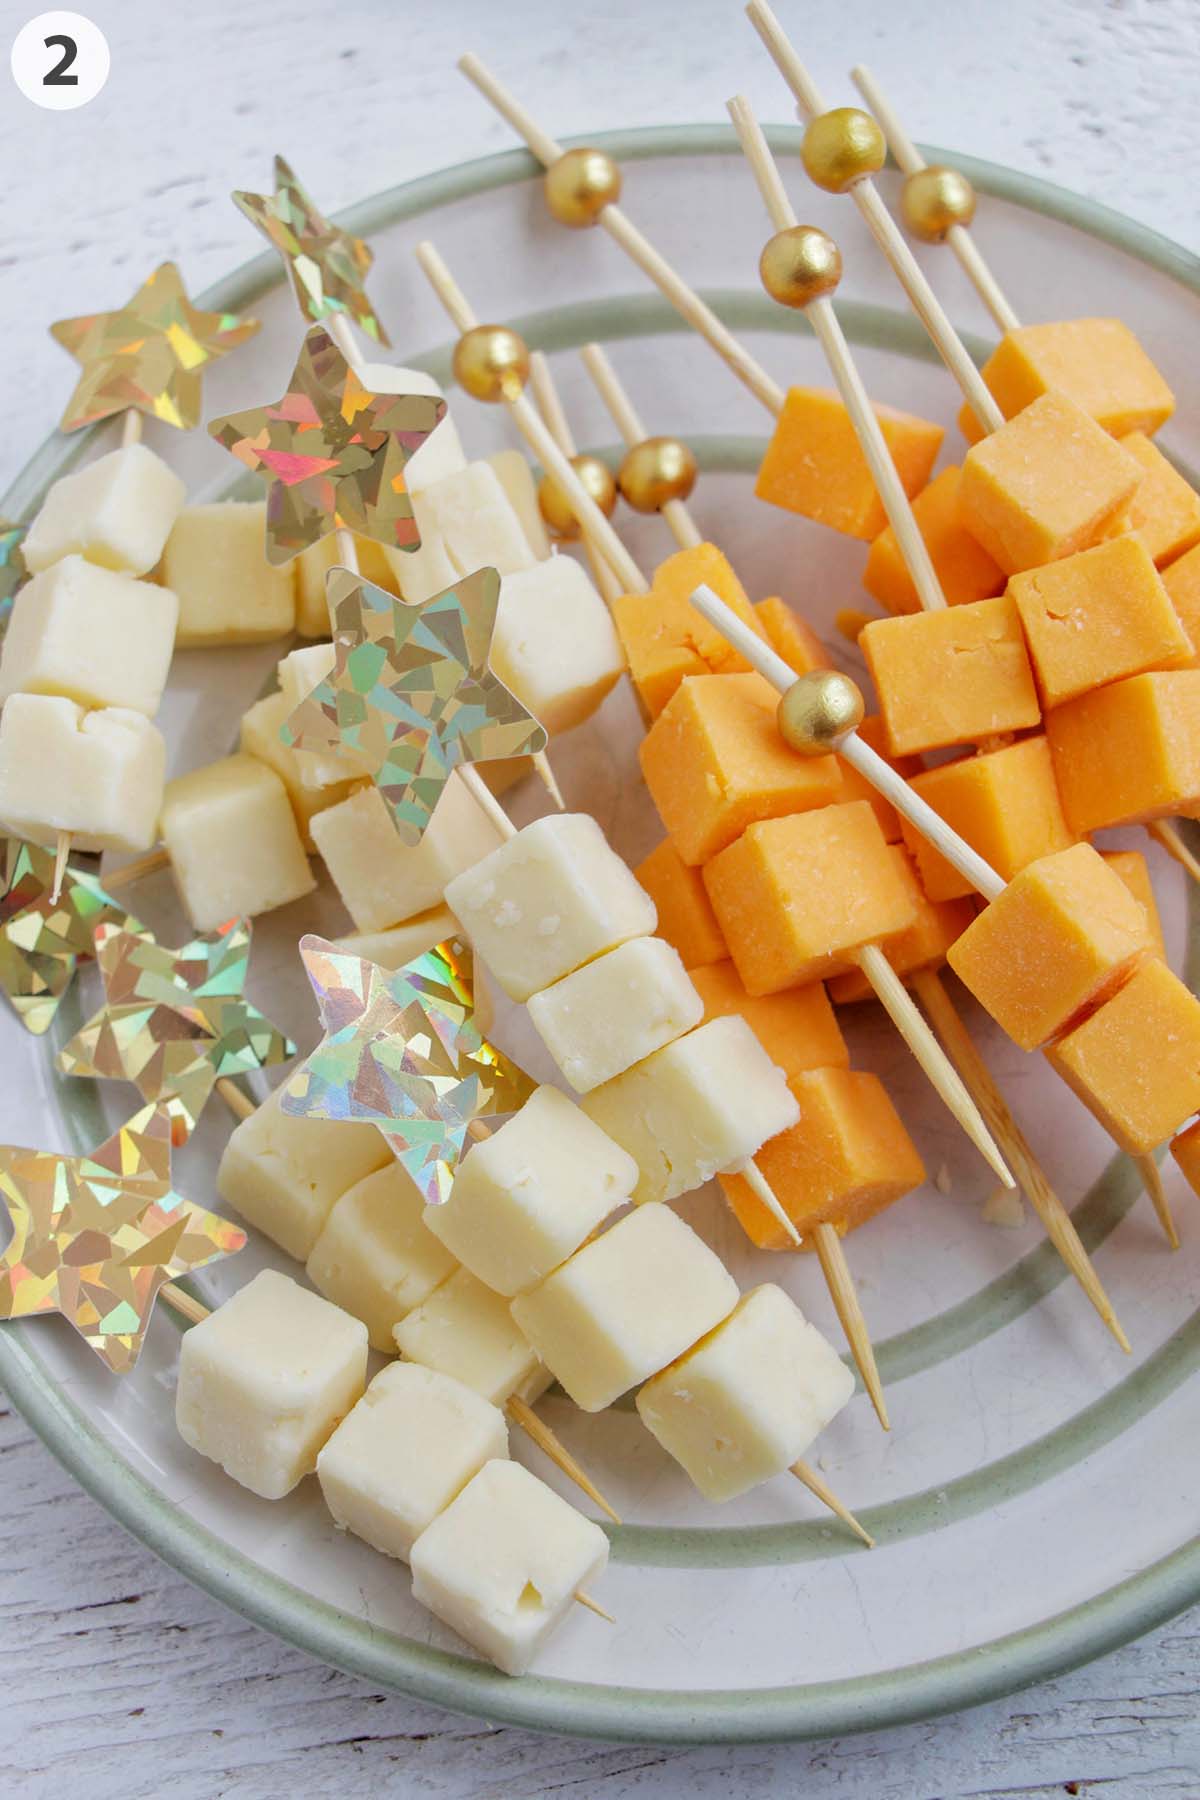 numbered photo showing cubed cheese on toothpicks.